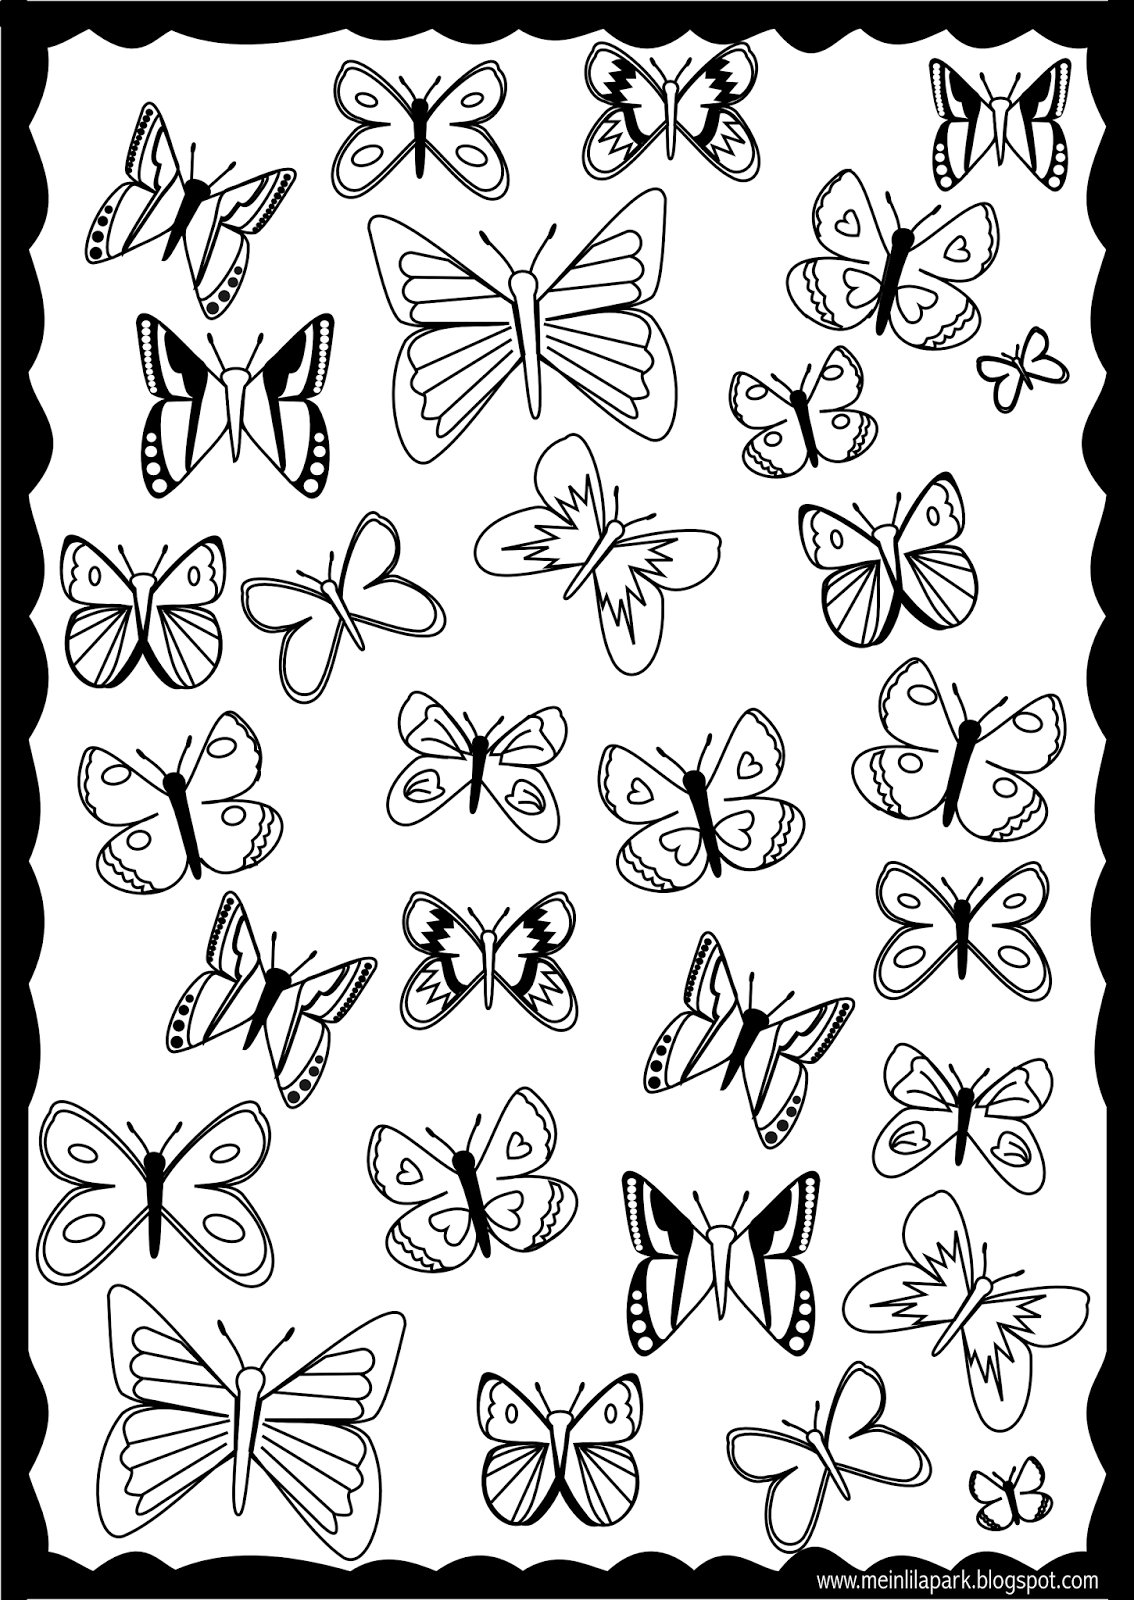 Free Printable Butterfly Pictures To Print